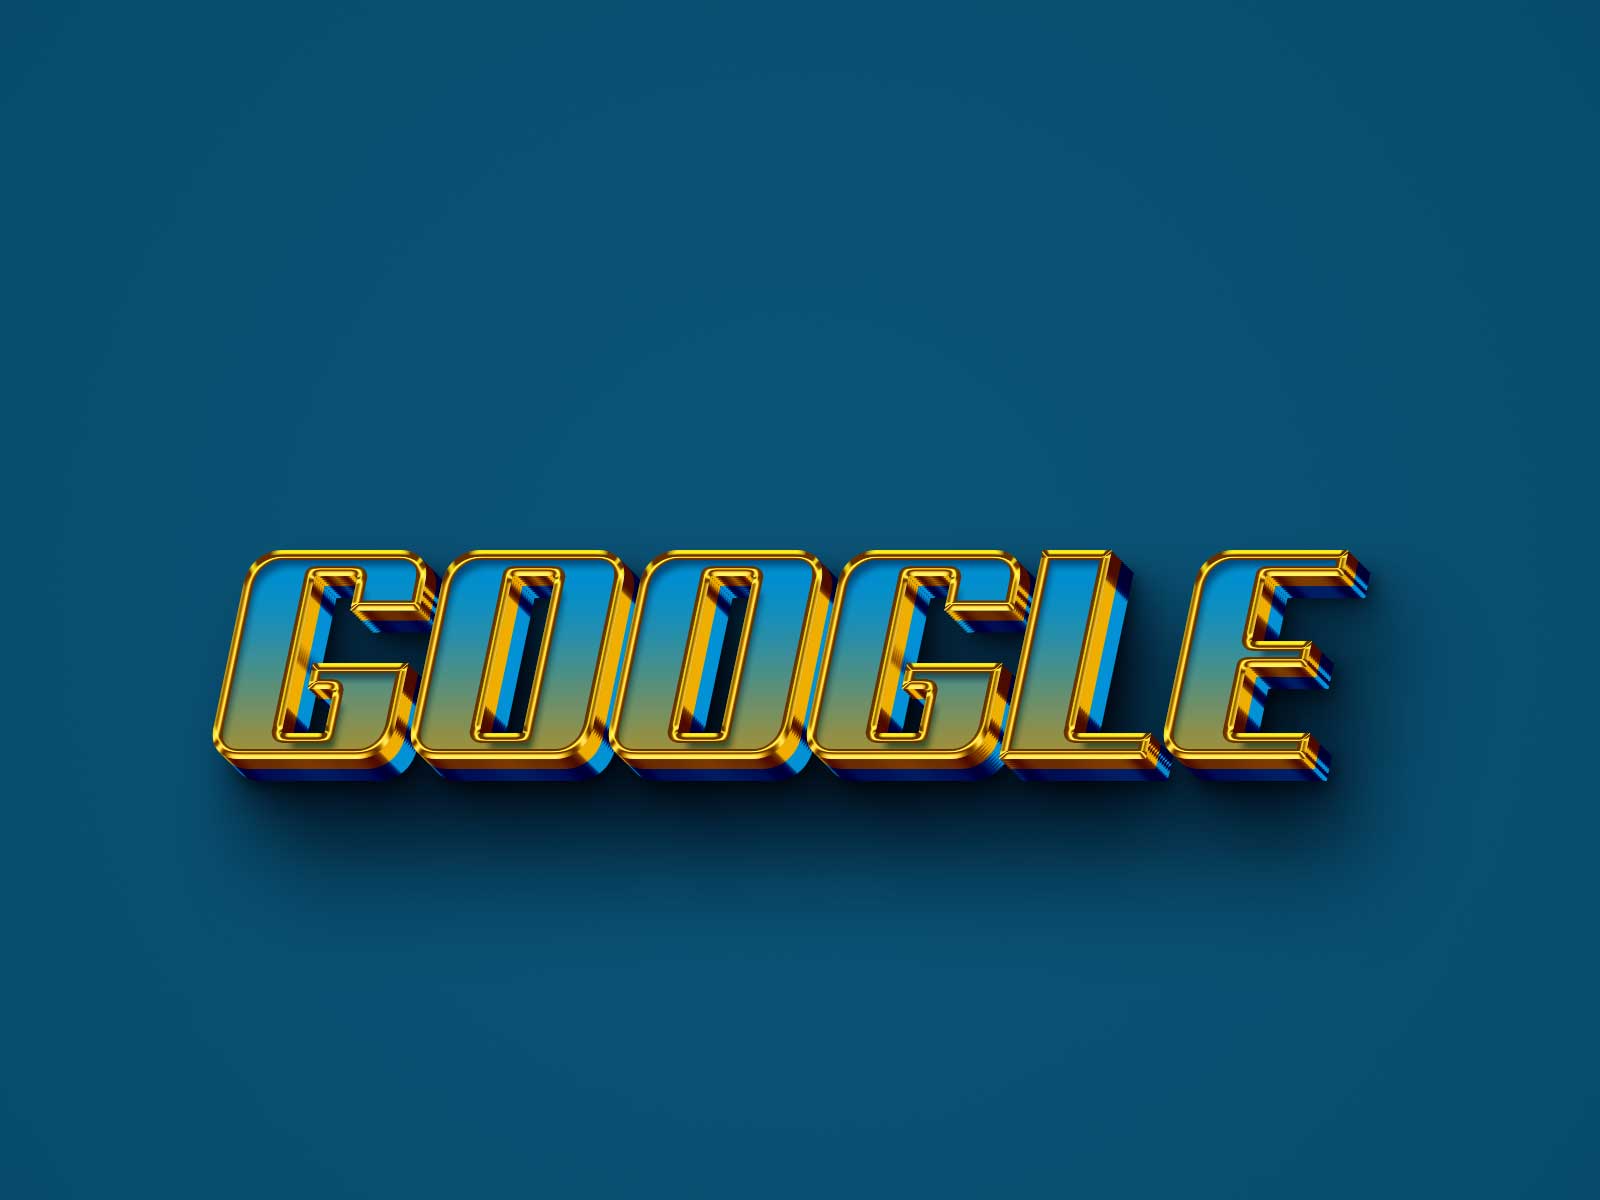 Google 3D editable text effect free download